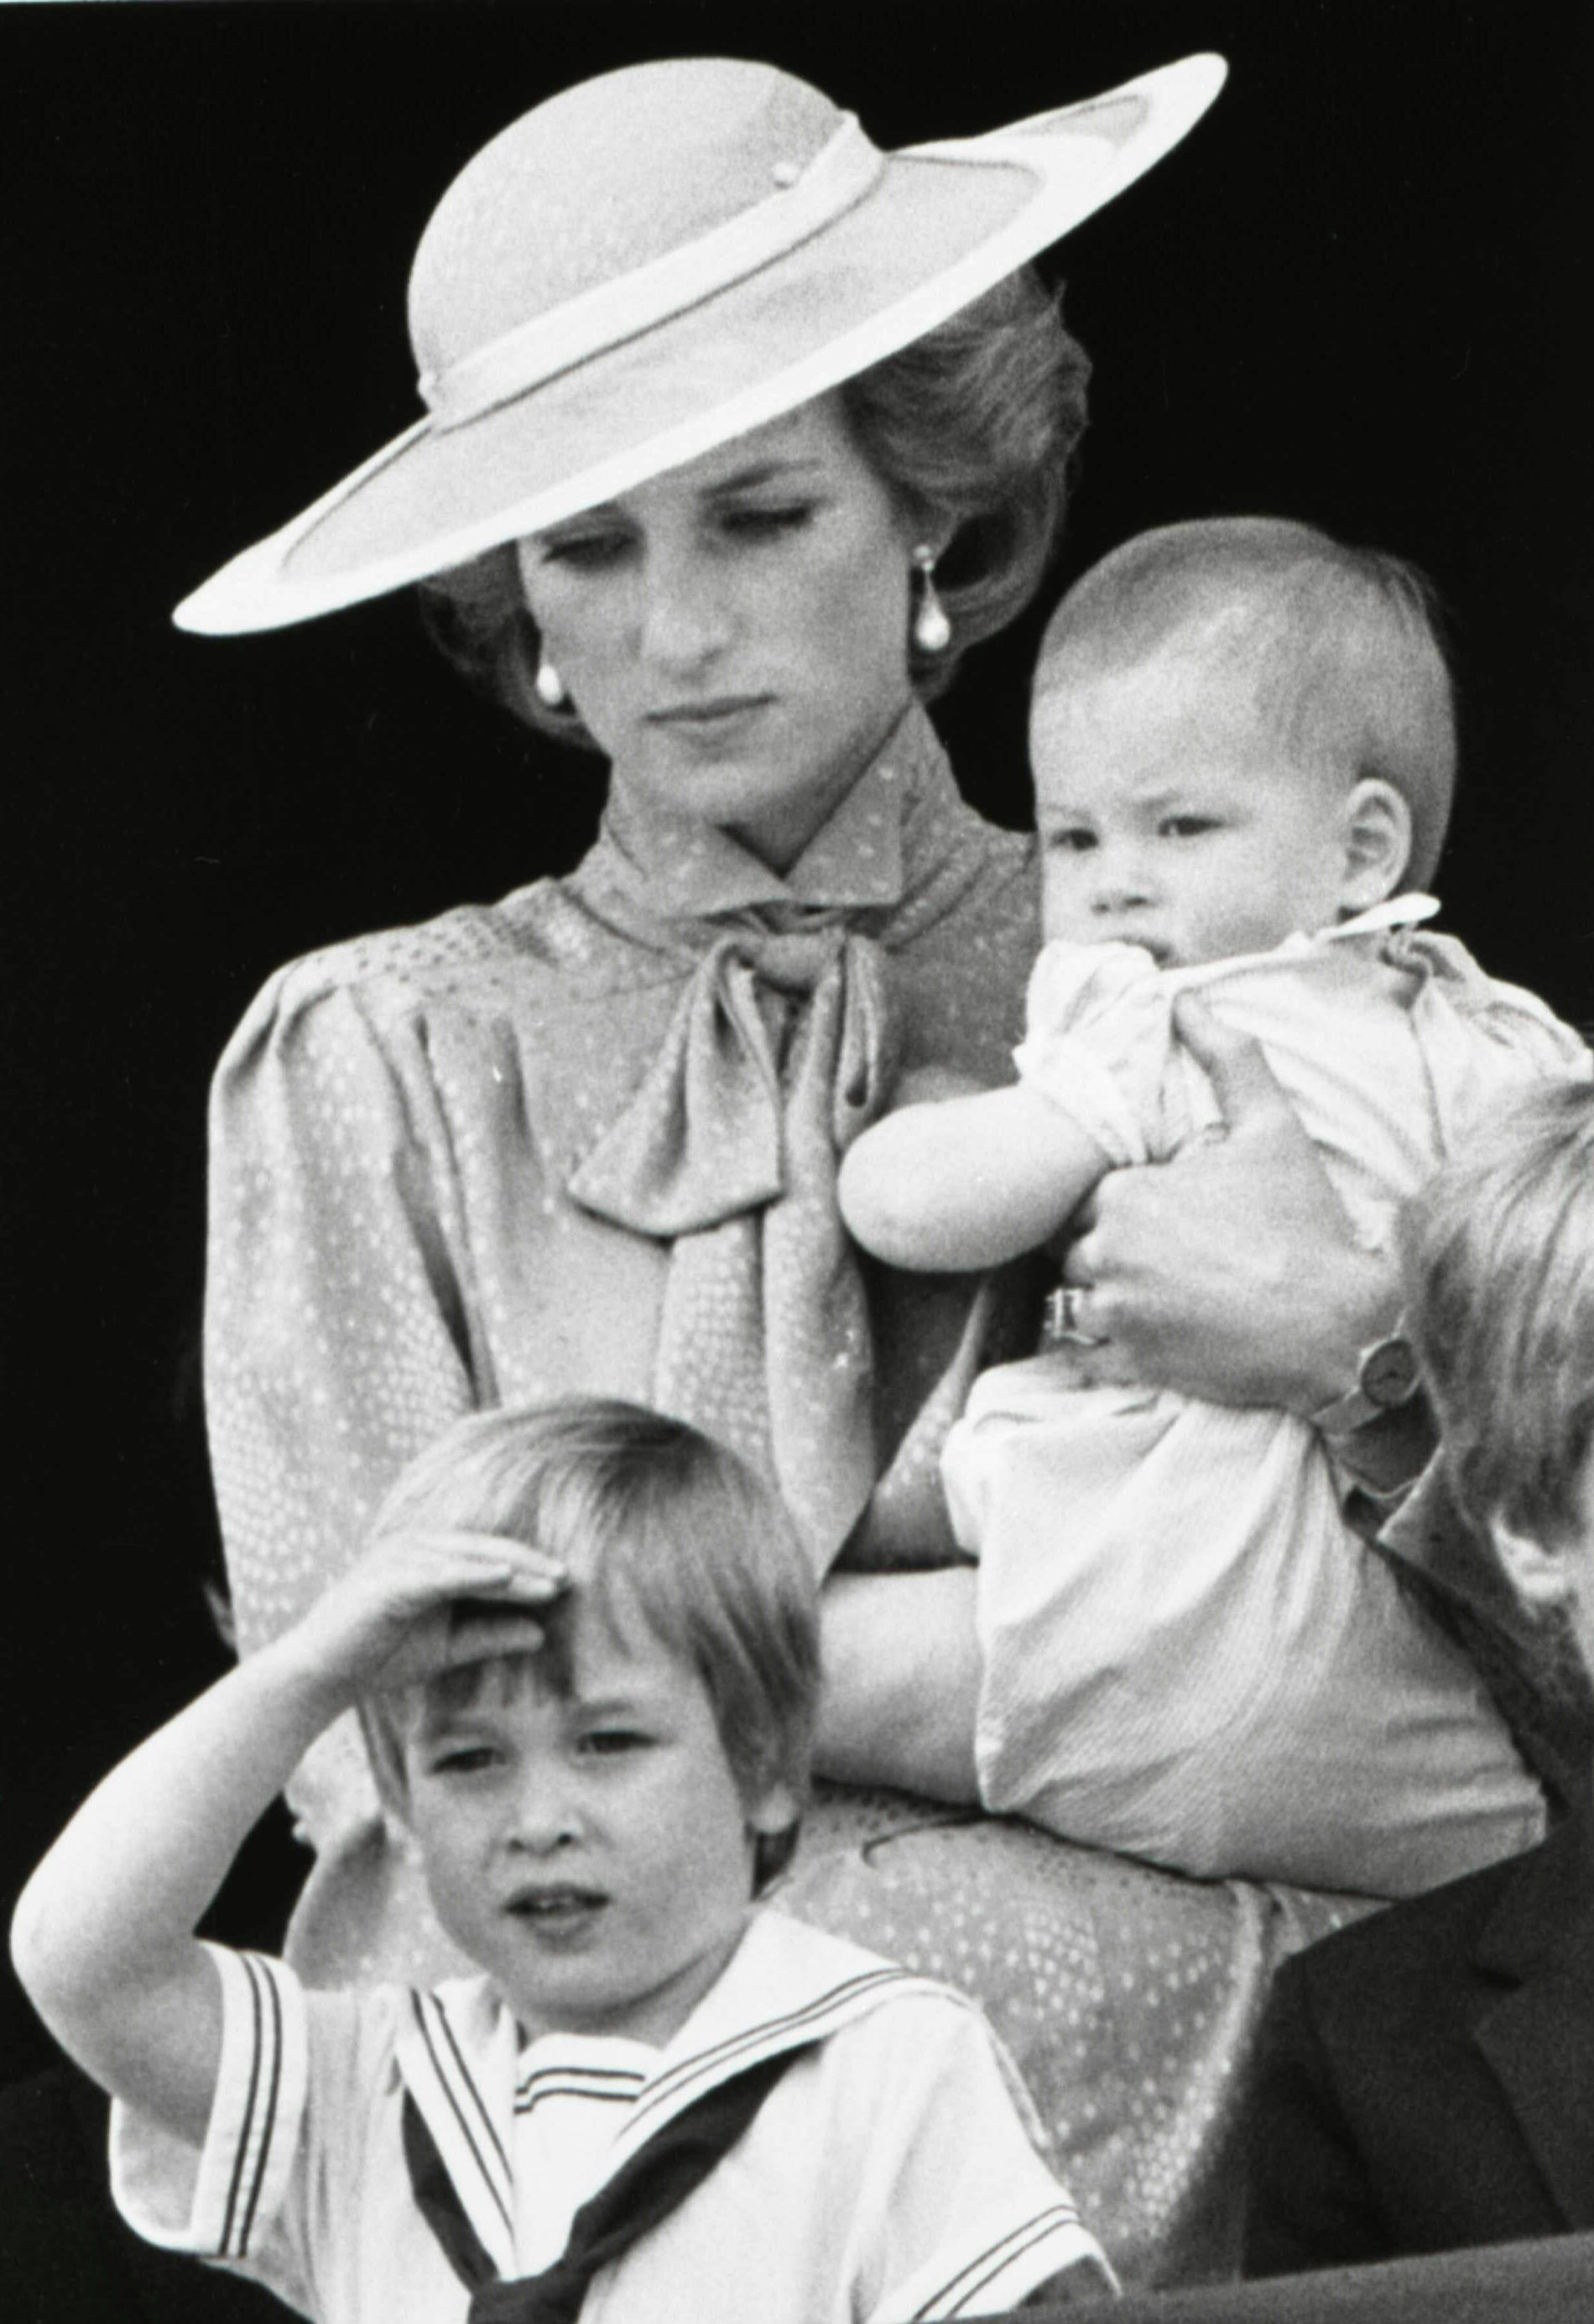 Prince William makes a royal salute as he watches the scene of Trooping the Colour from the balcony of Buckingham Palace with his brother Harry and mother Princess Diana on June 15, 1985 in London. REUTERS/Roy Letkey MAGDESK